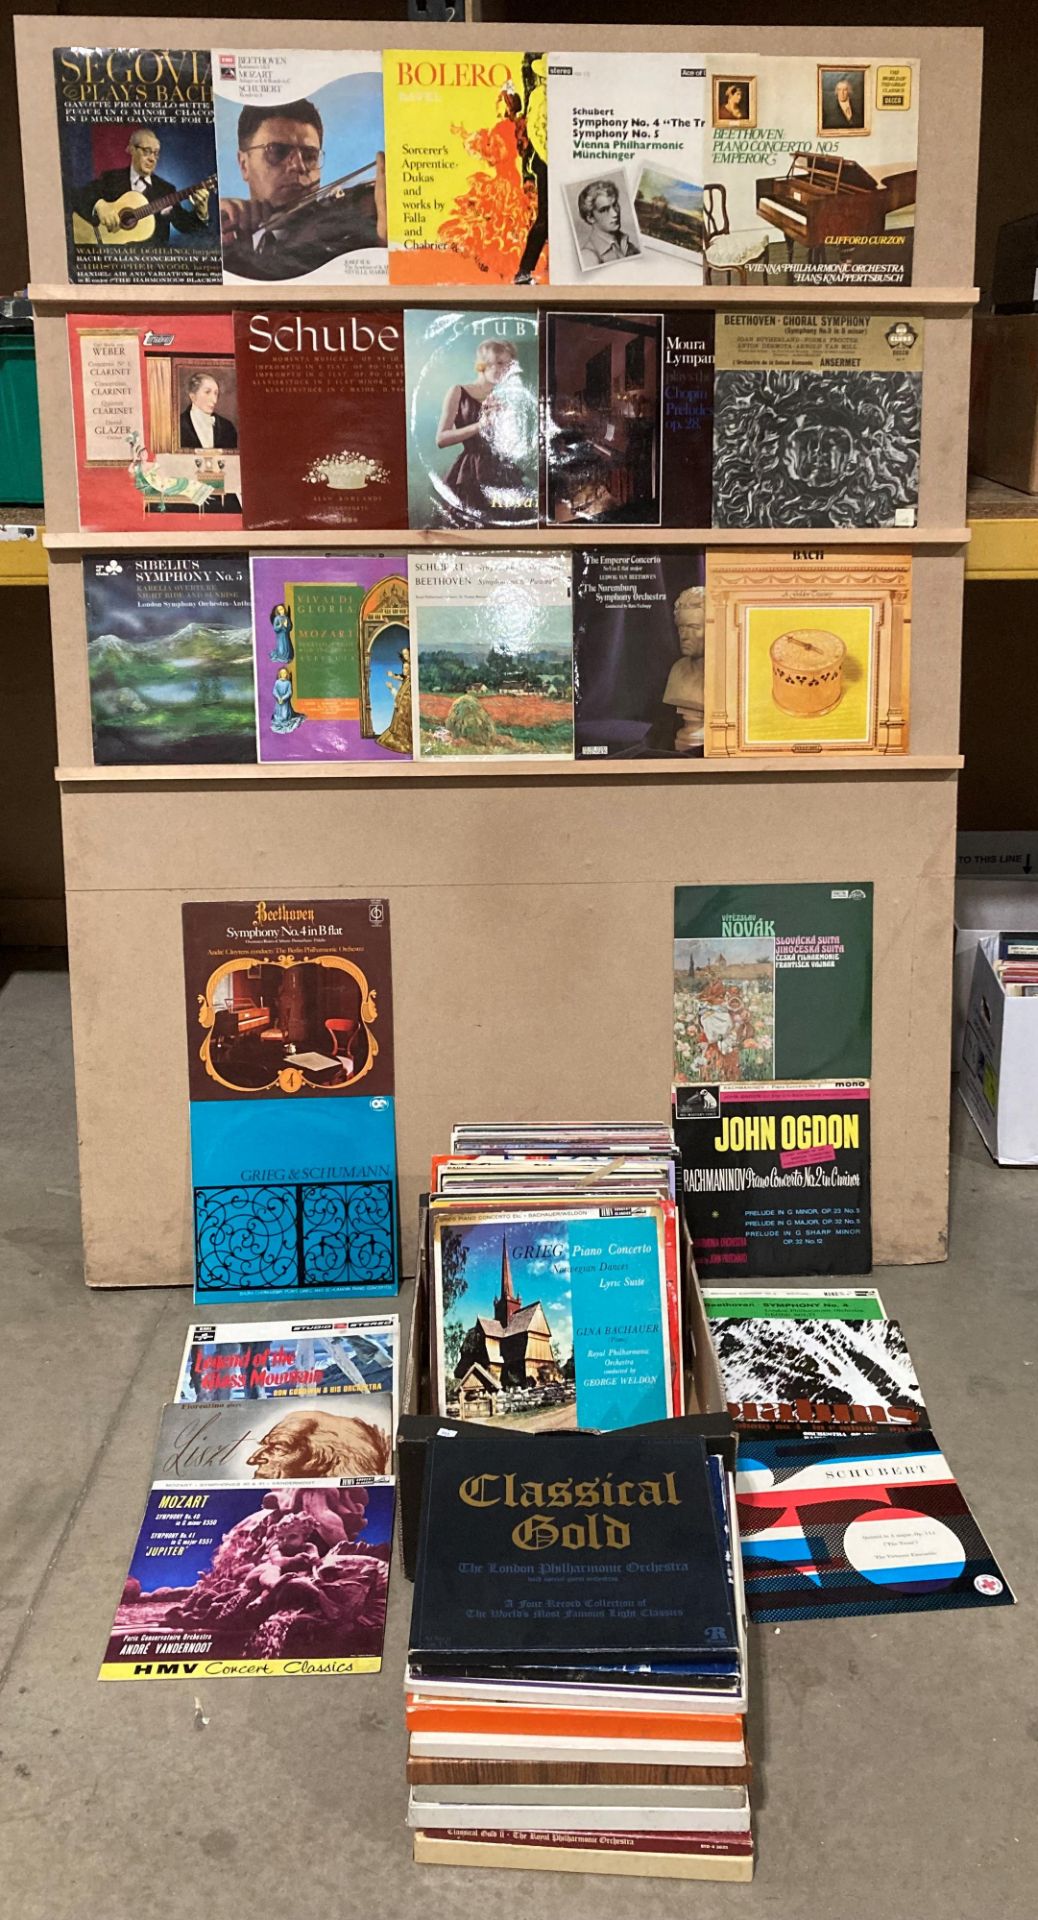 Contents to cardboard tray - approximately 90 assorted LPs, mainly classical,